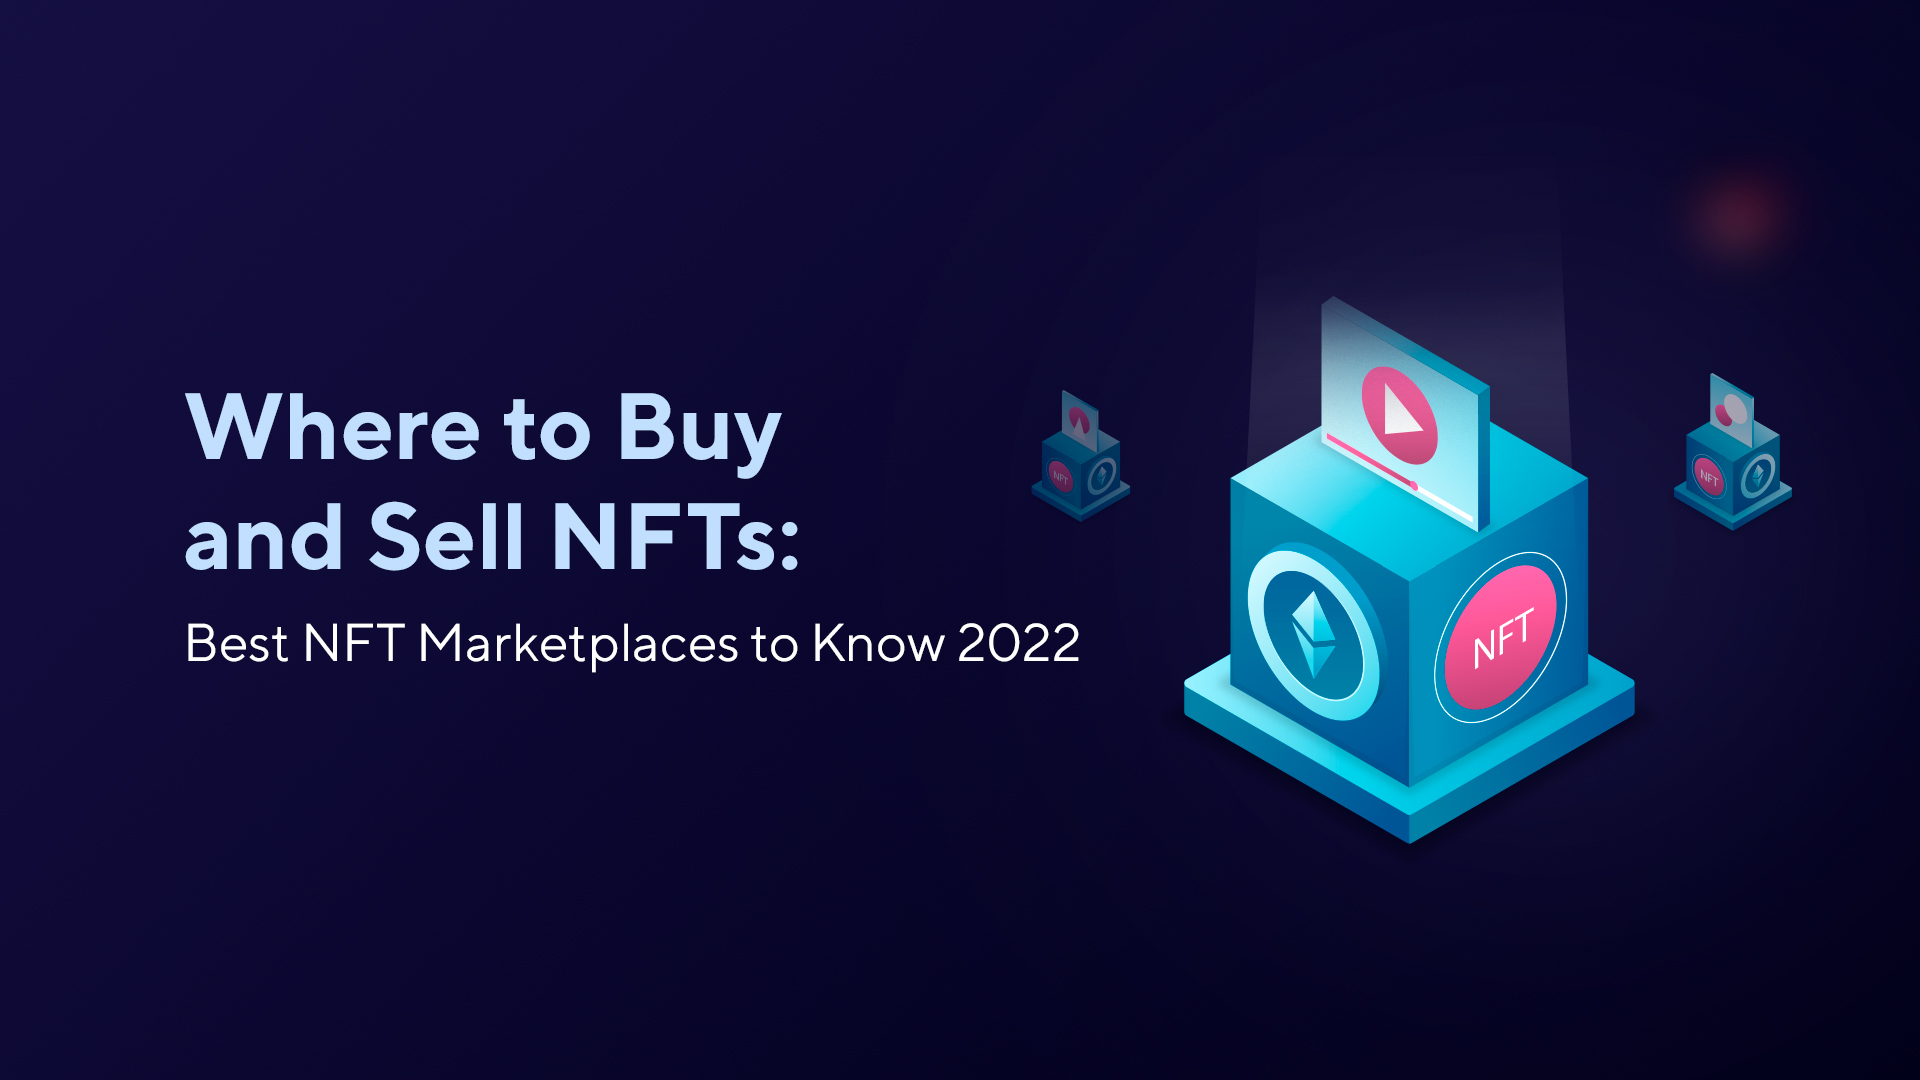 Where to Buy and Sell NFTs: Best NFT Marketplaces to Know 2022